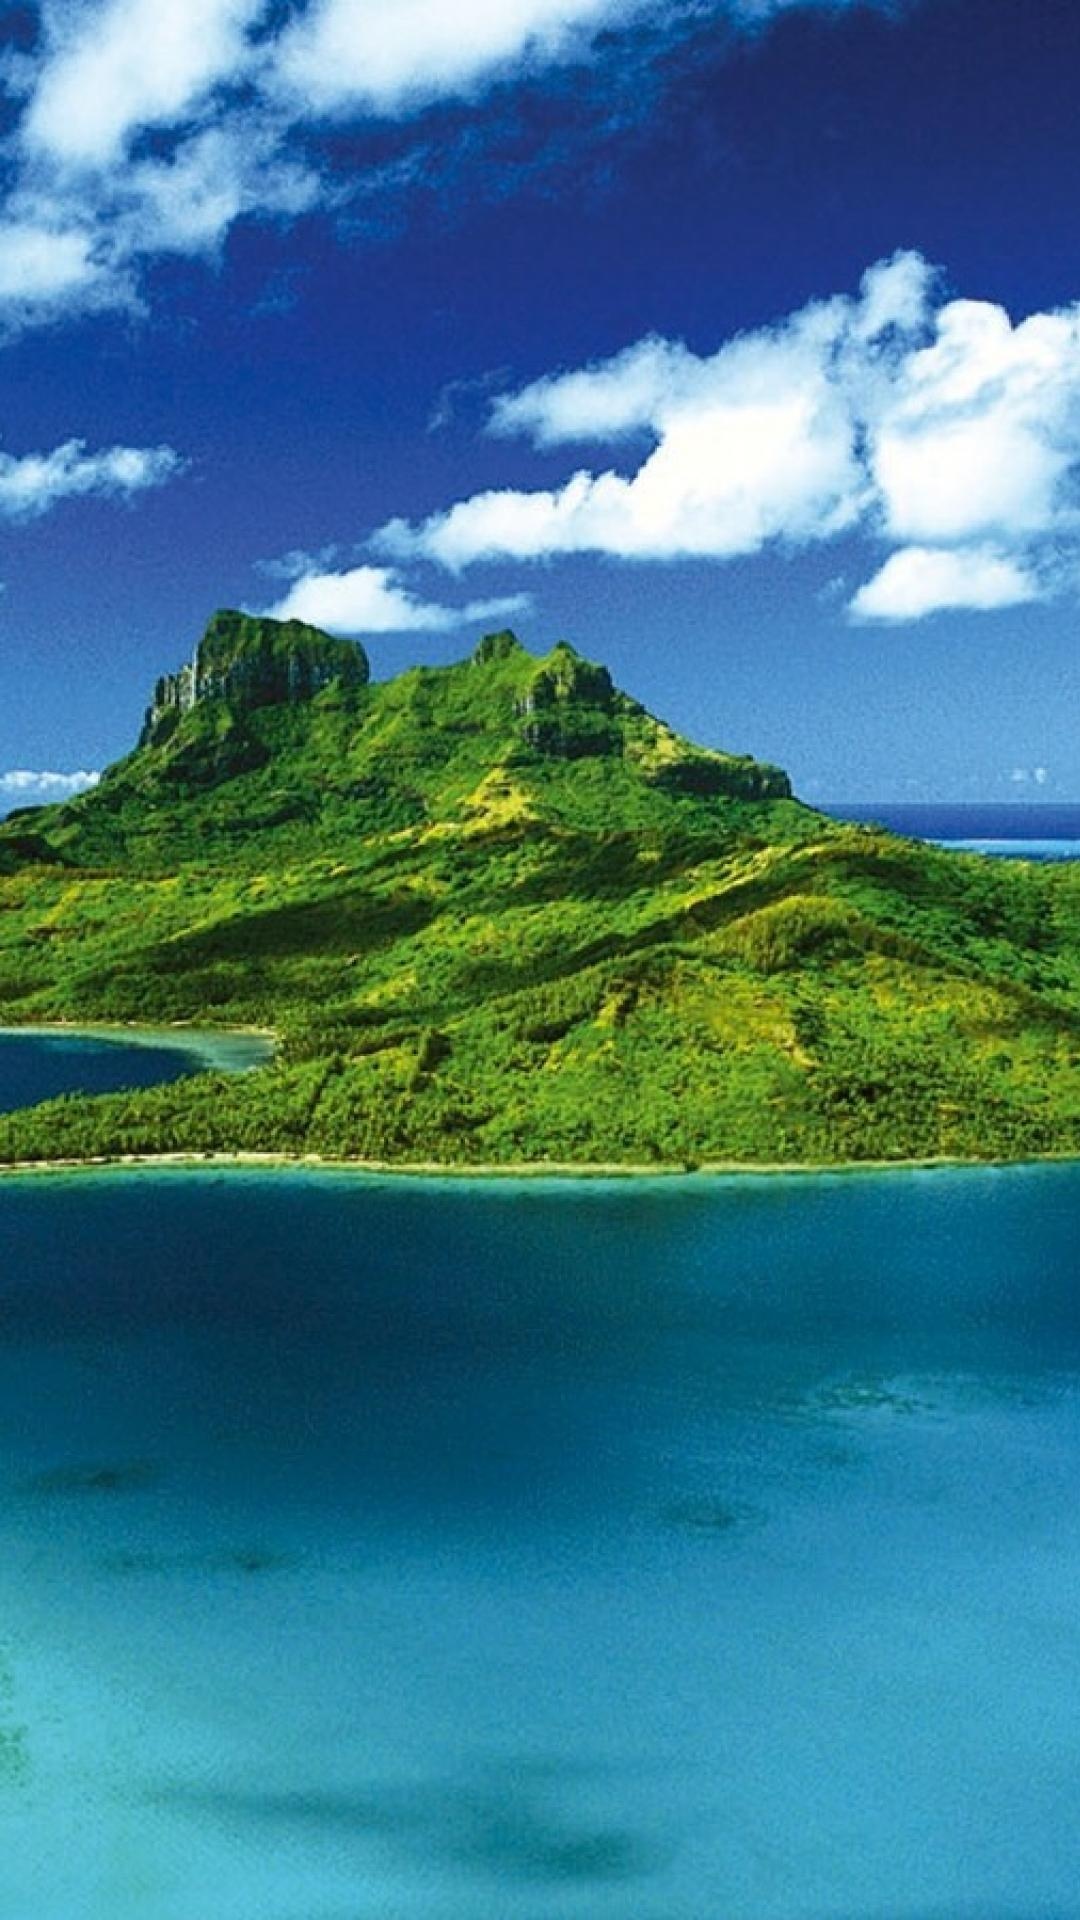 French Polynesia wallpapers, Cool wallpapers, High-resolution images, Stunning views, 1080x1920 Full HD Handy